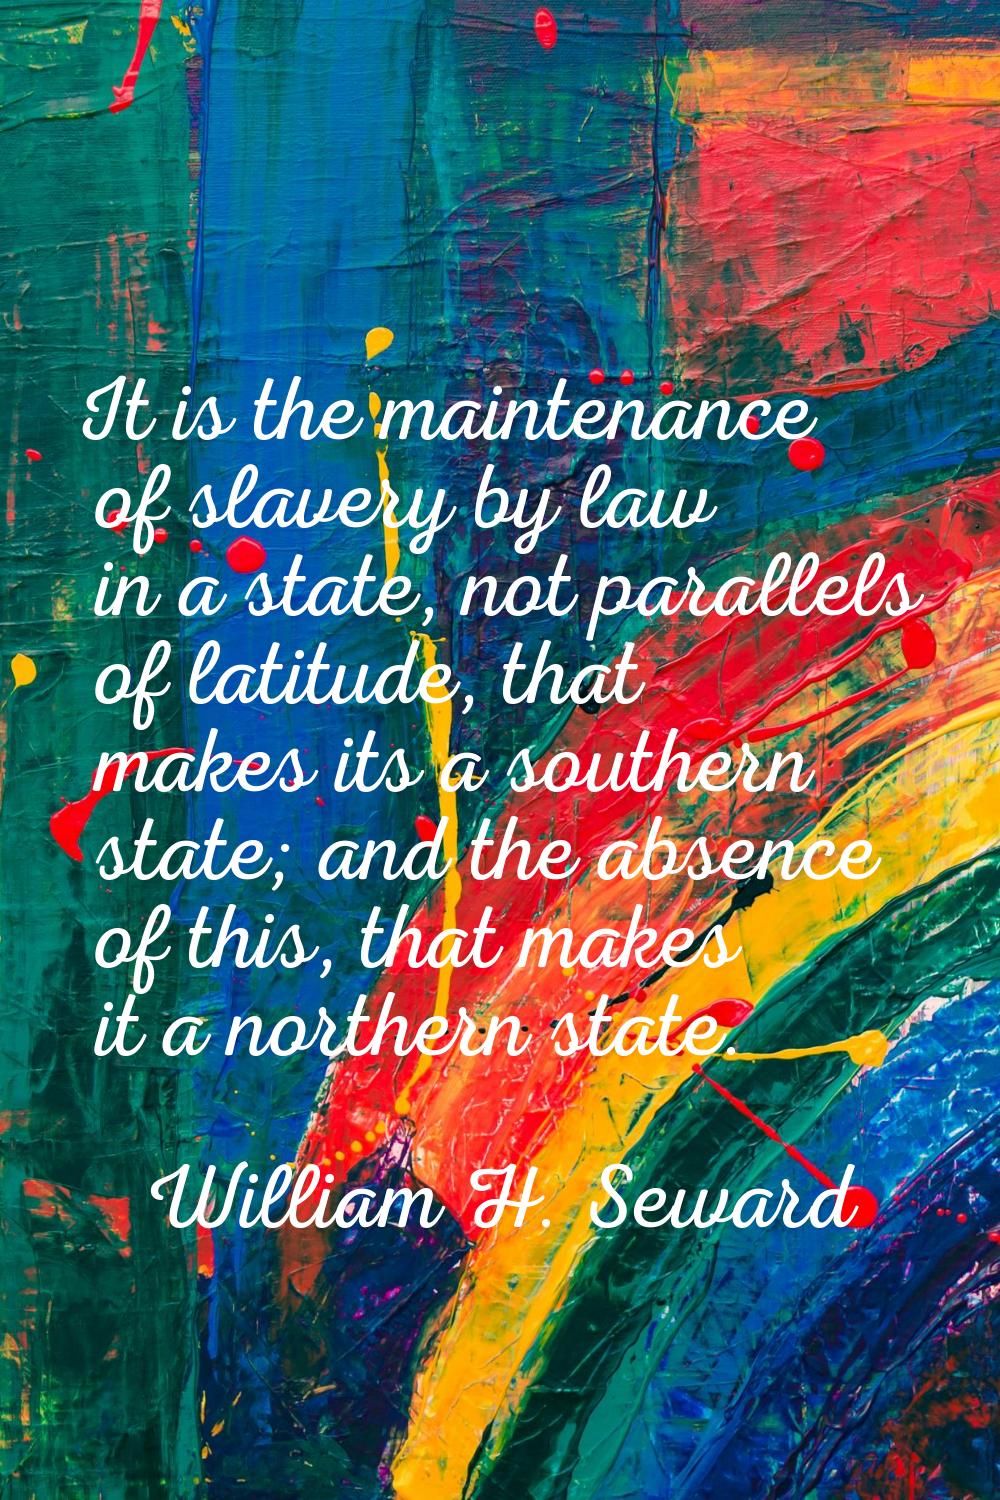 It is the maintenance of slavery by law in a state, not parallels of latitude, that makes its a sou